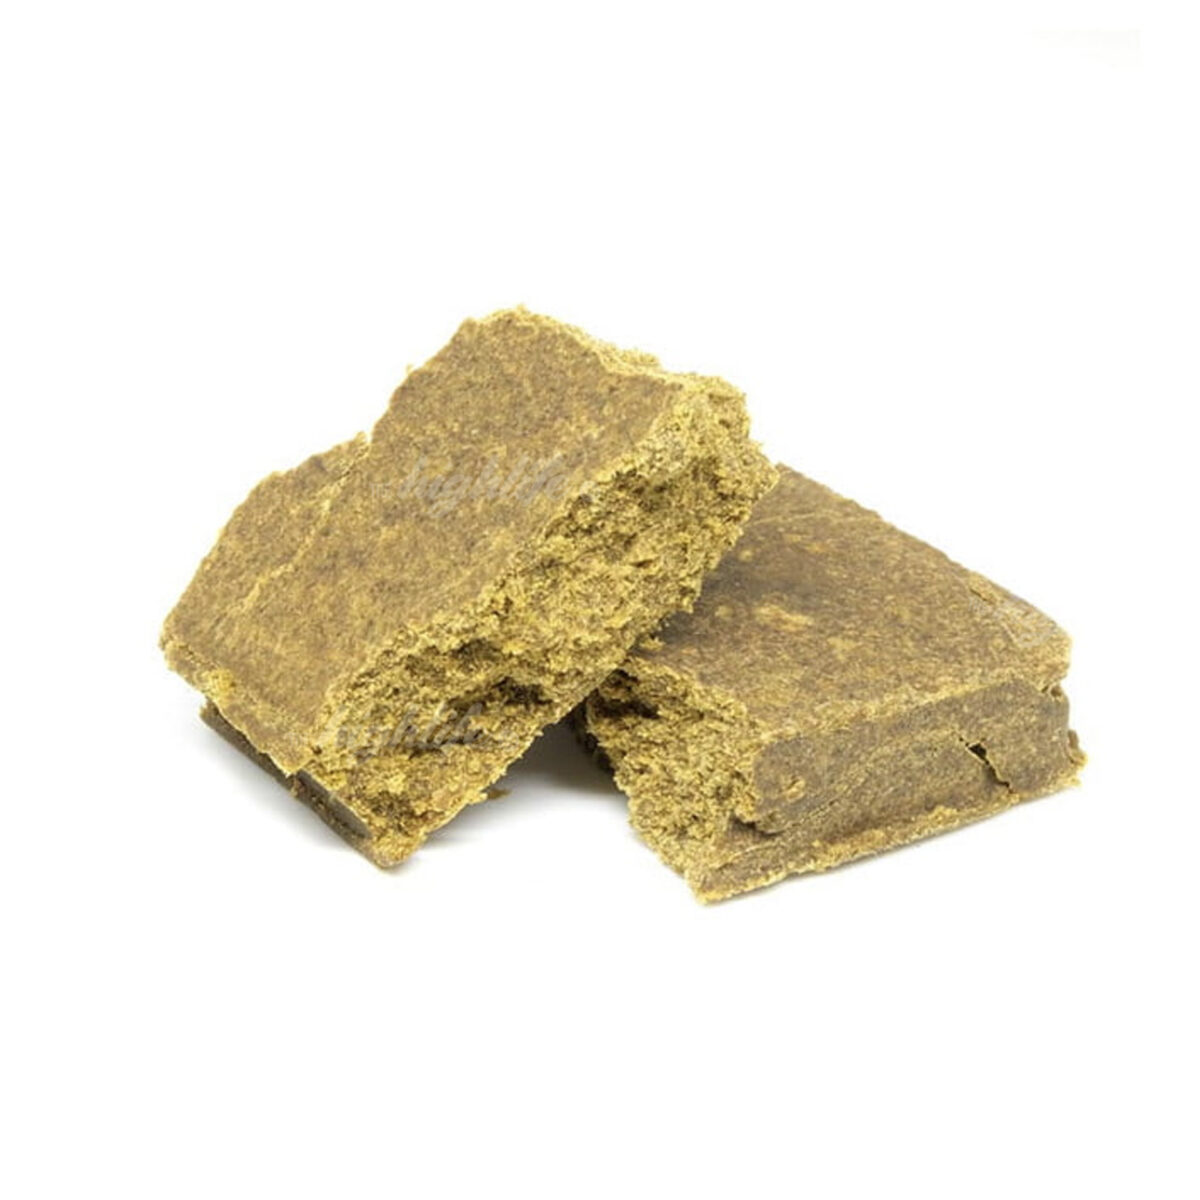 Blonde Hash Hash - Buy Online - Canada - Ottawa Delivery